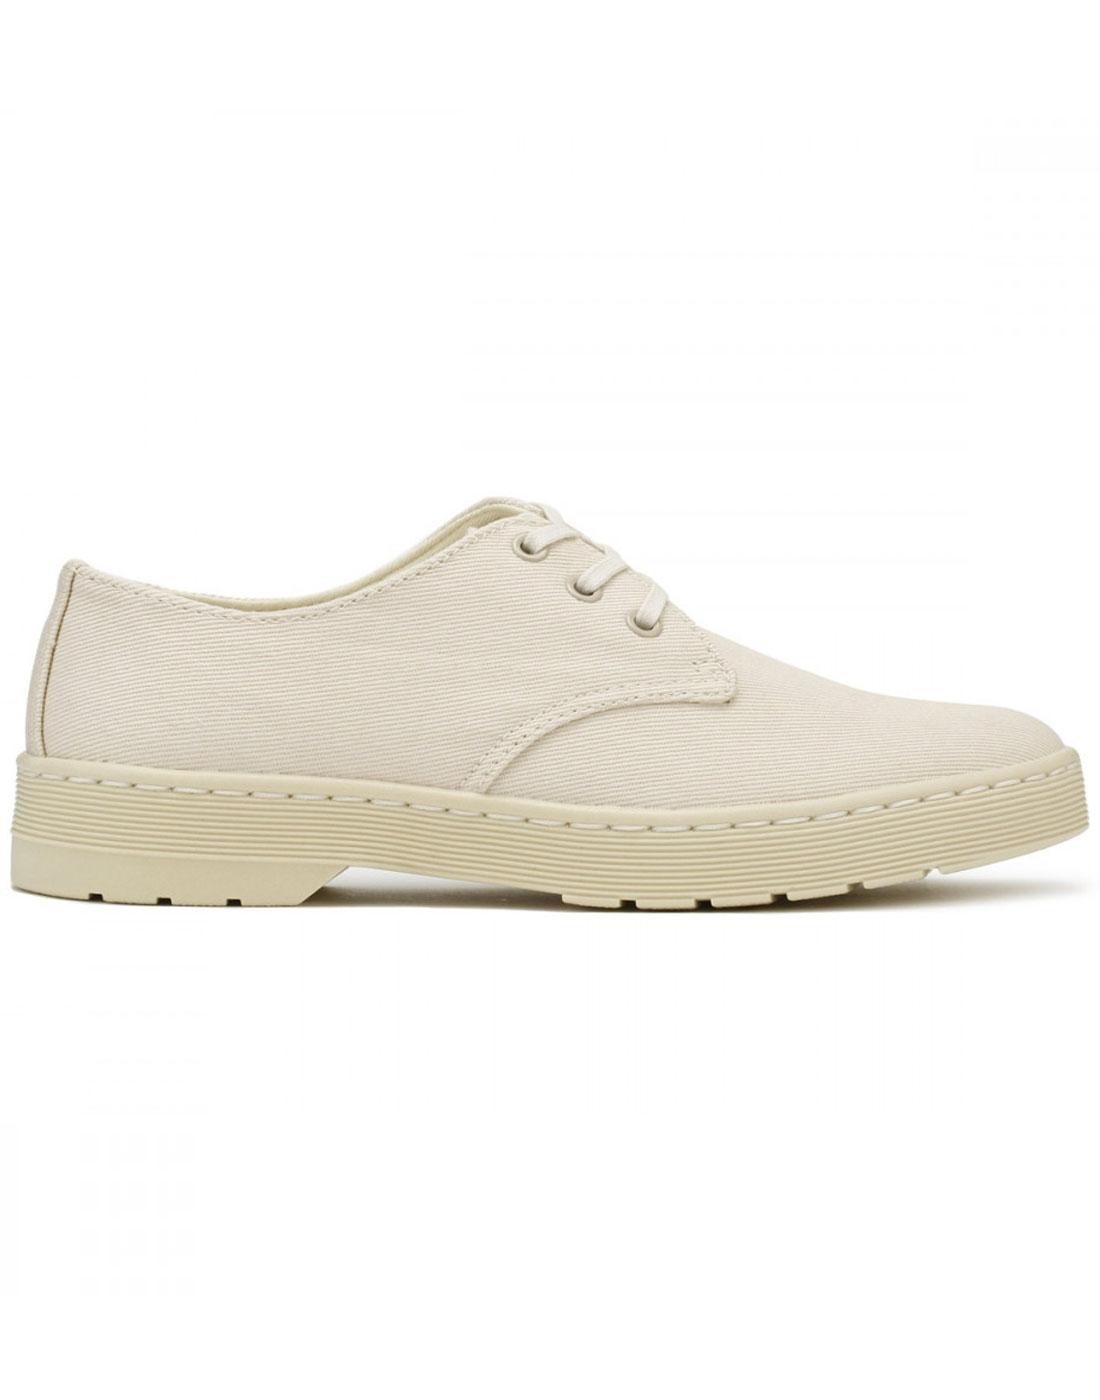 DR MARTENS Delray Retro Overdyed Twill Derby Shoes Bone